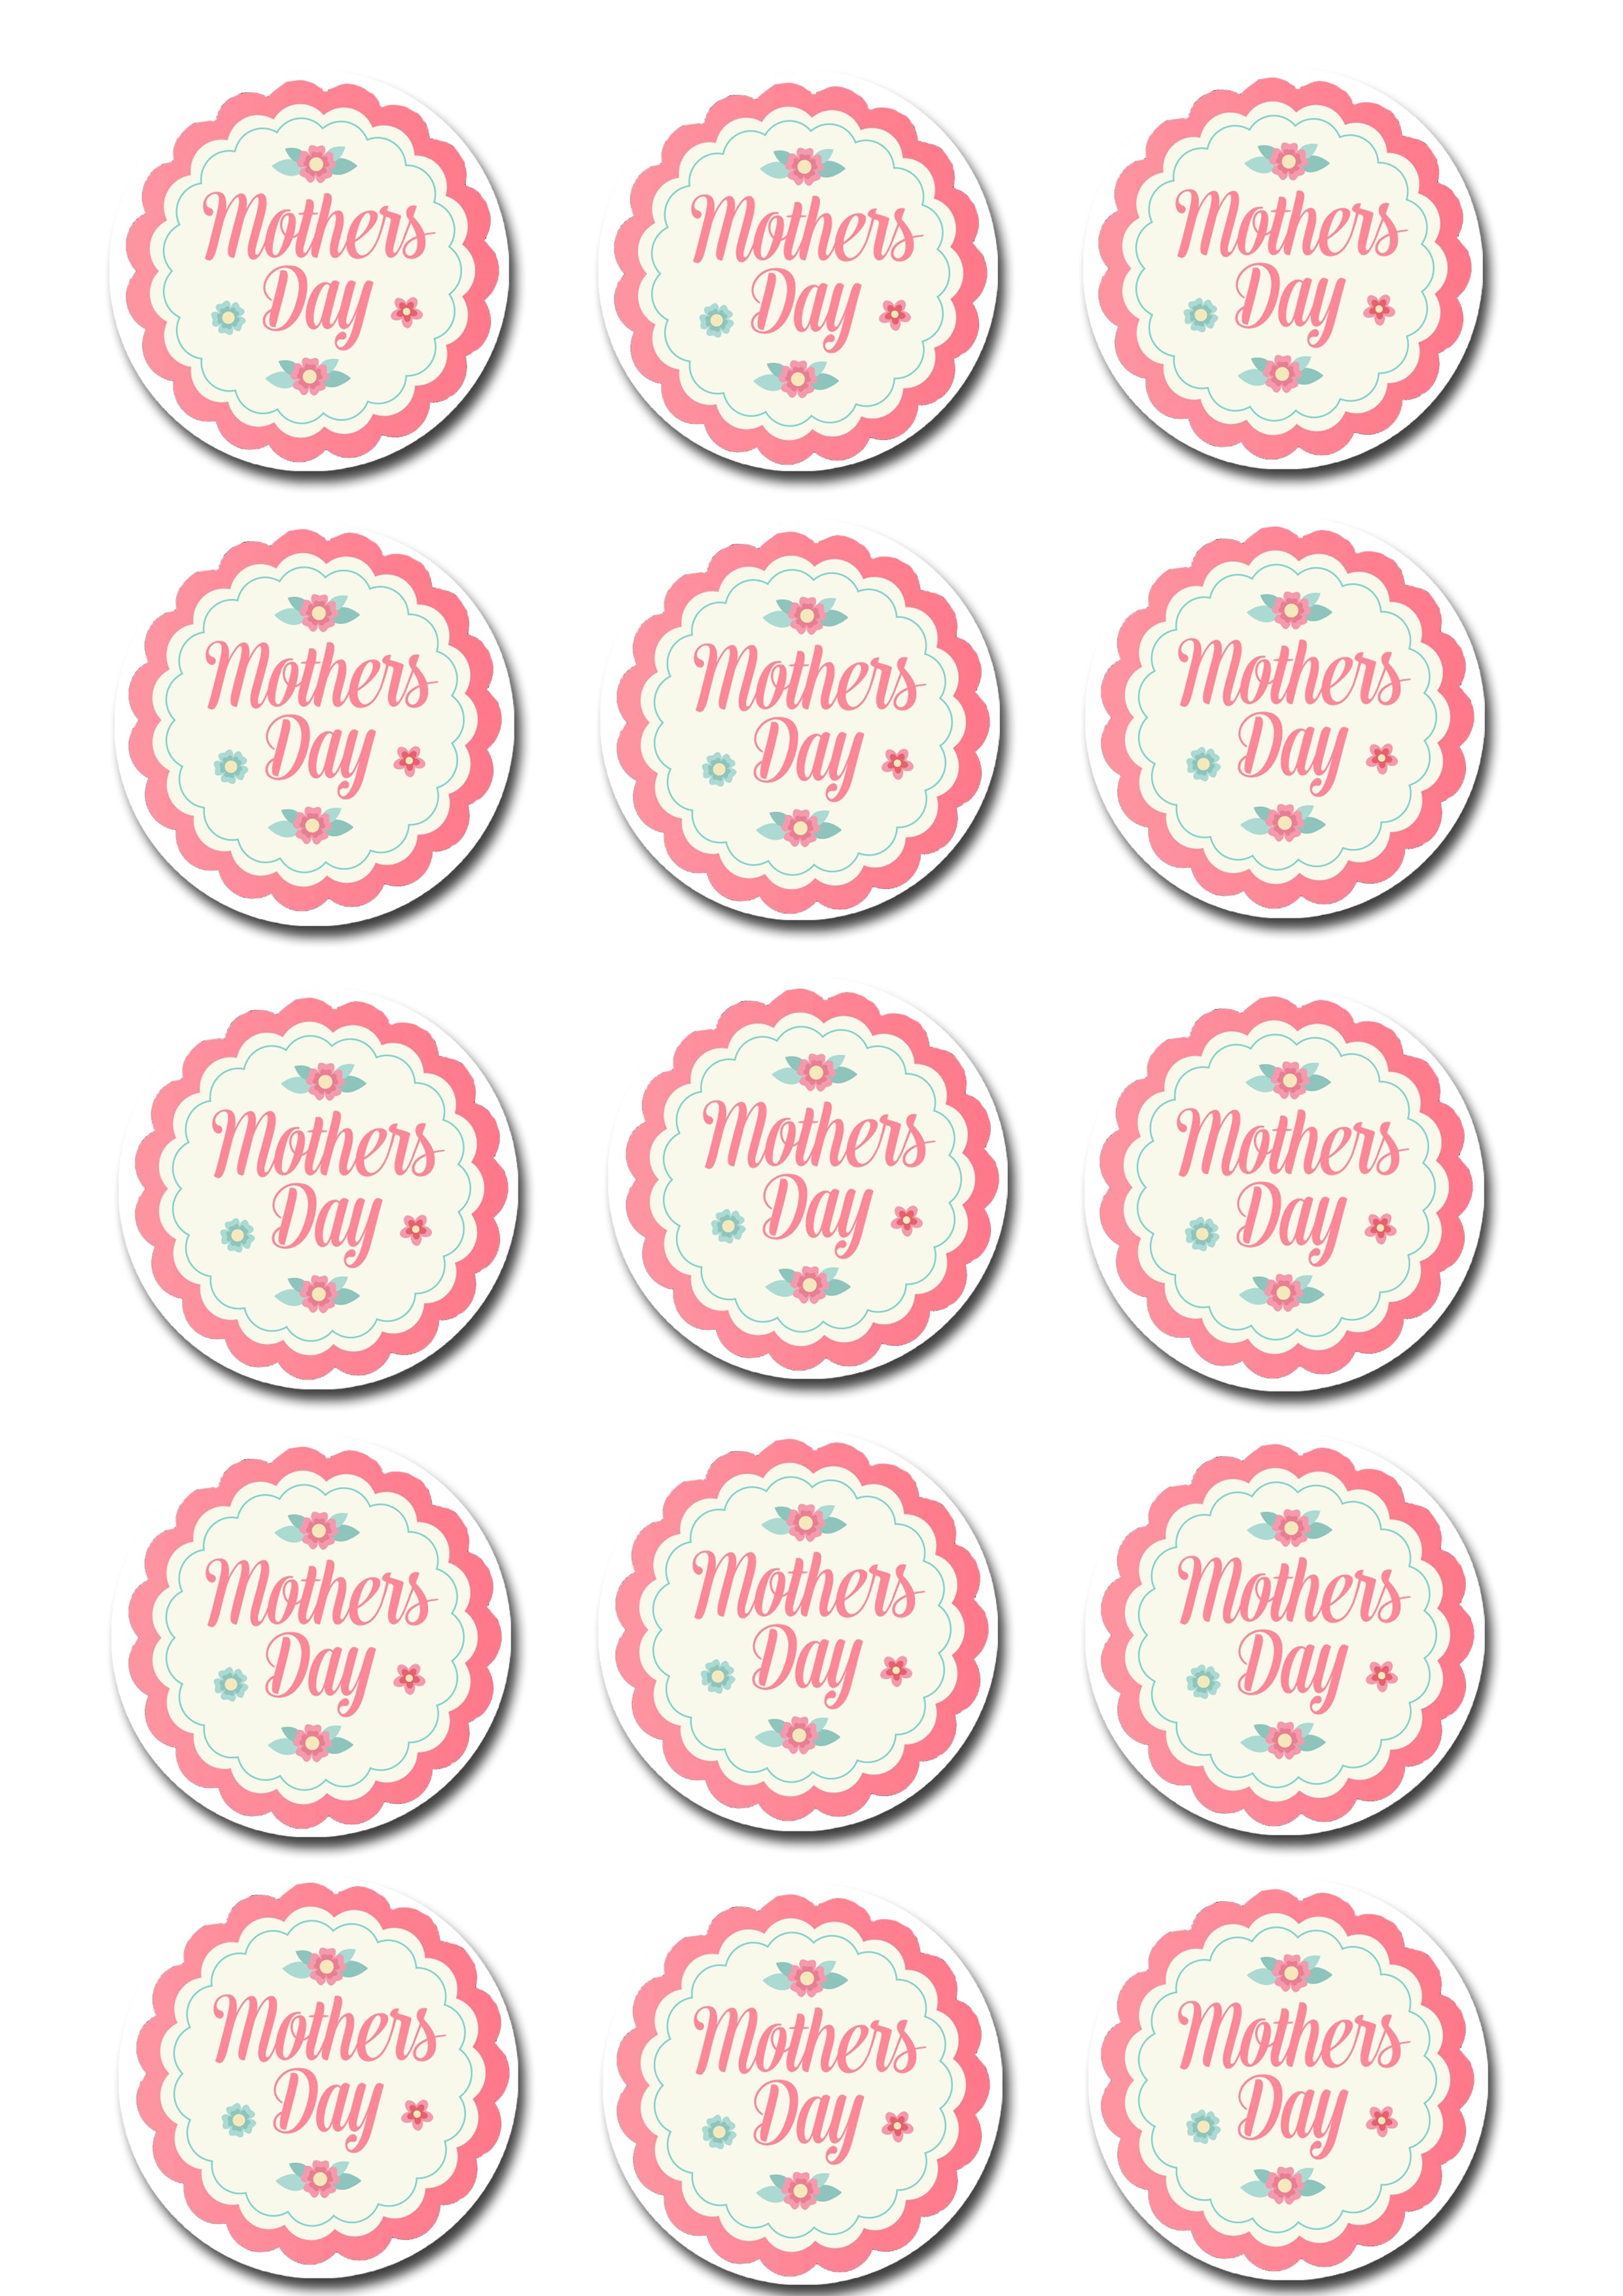 mothers-day-edible-cupcake-toppers-deezee-designs